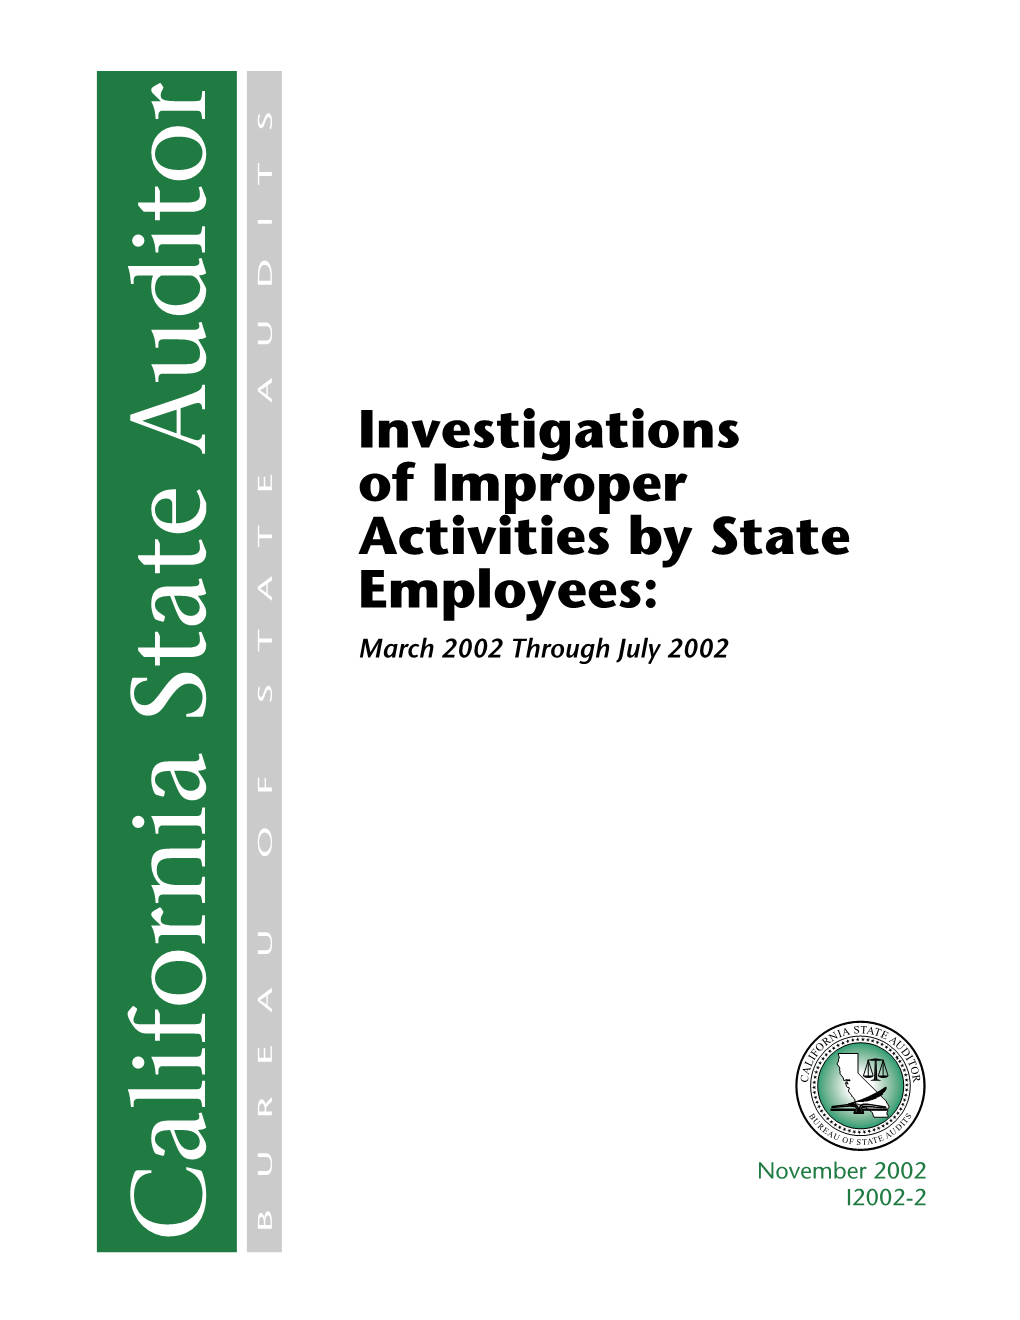 Investigations of Improper Activities by State Employees: March 2002 Through July 2002